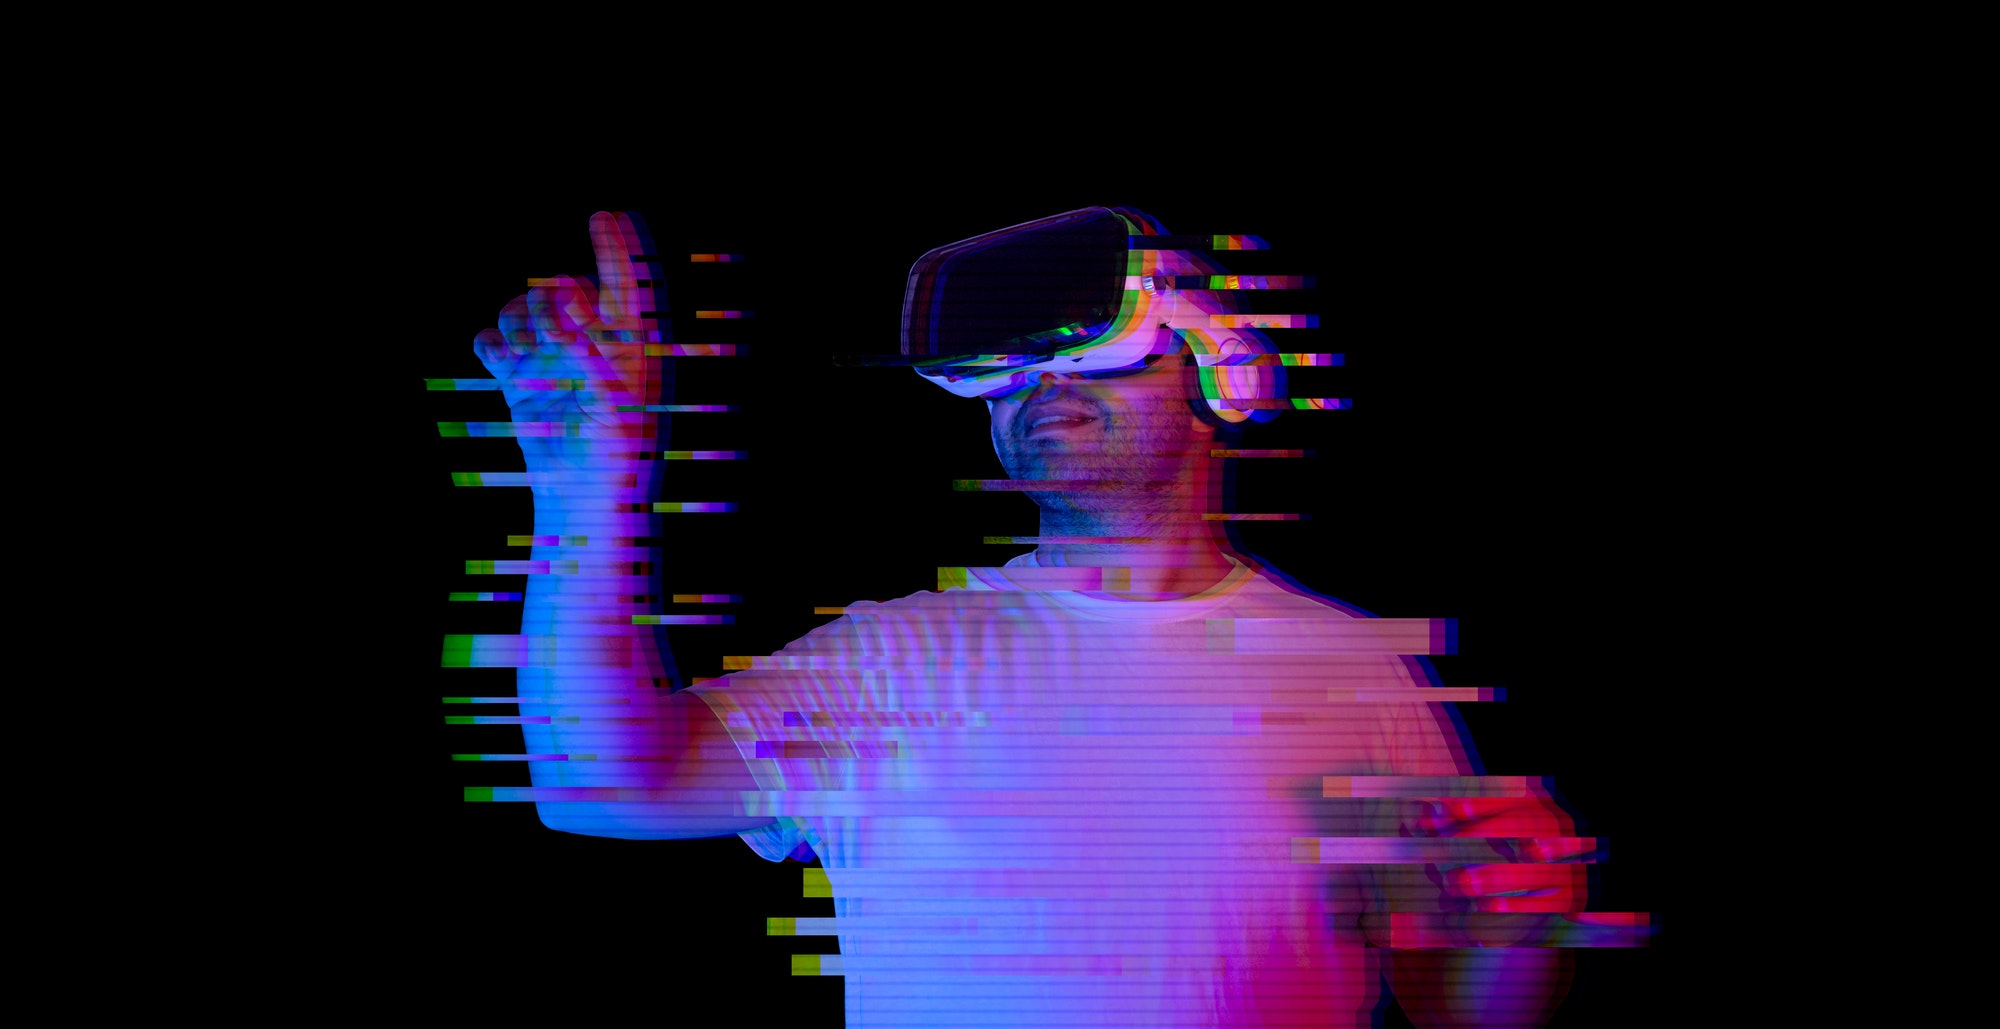 young-man-using-vr-glasses-with-glitch-effect-new-virtual-world-metaverse.jpg